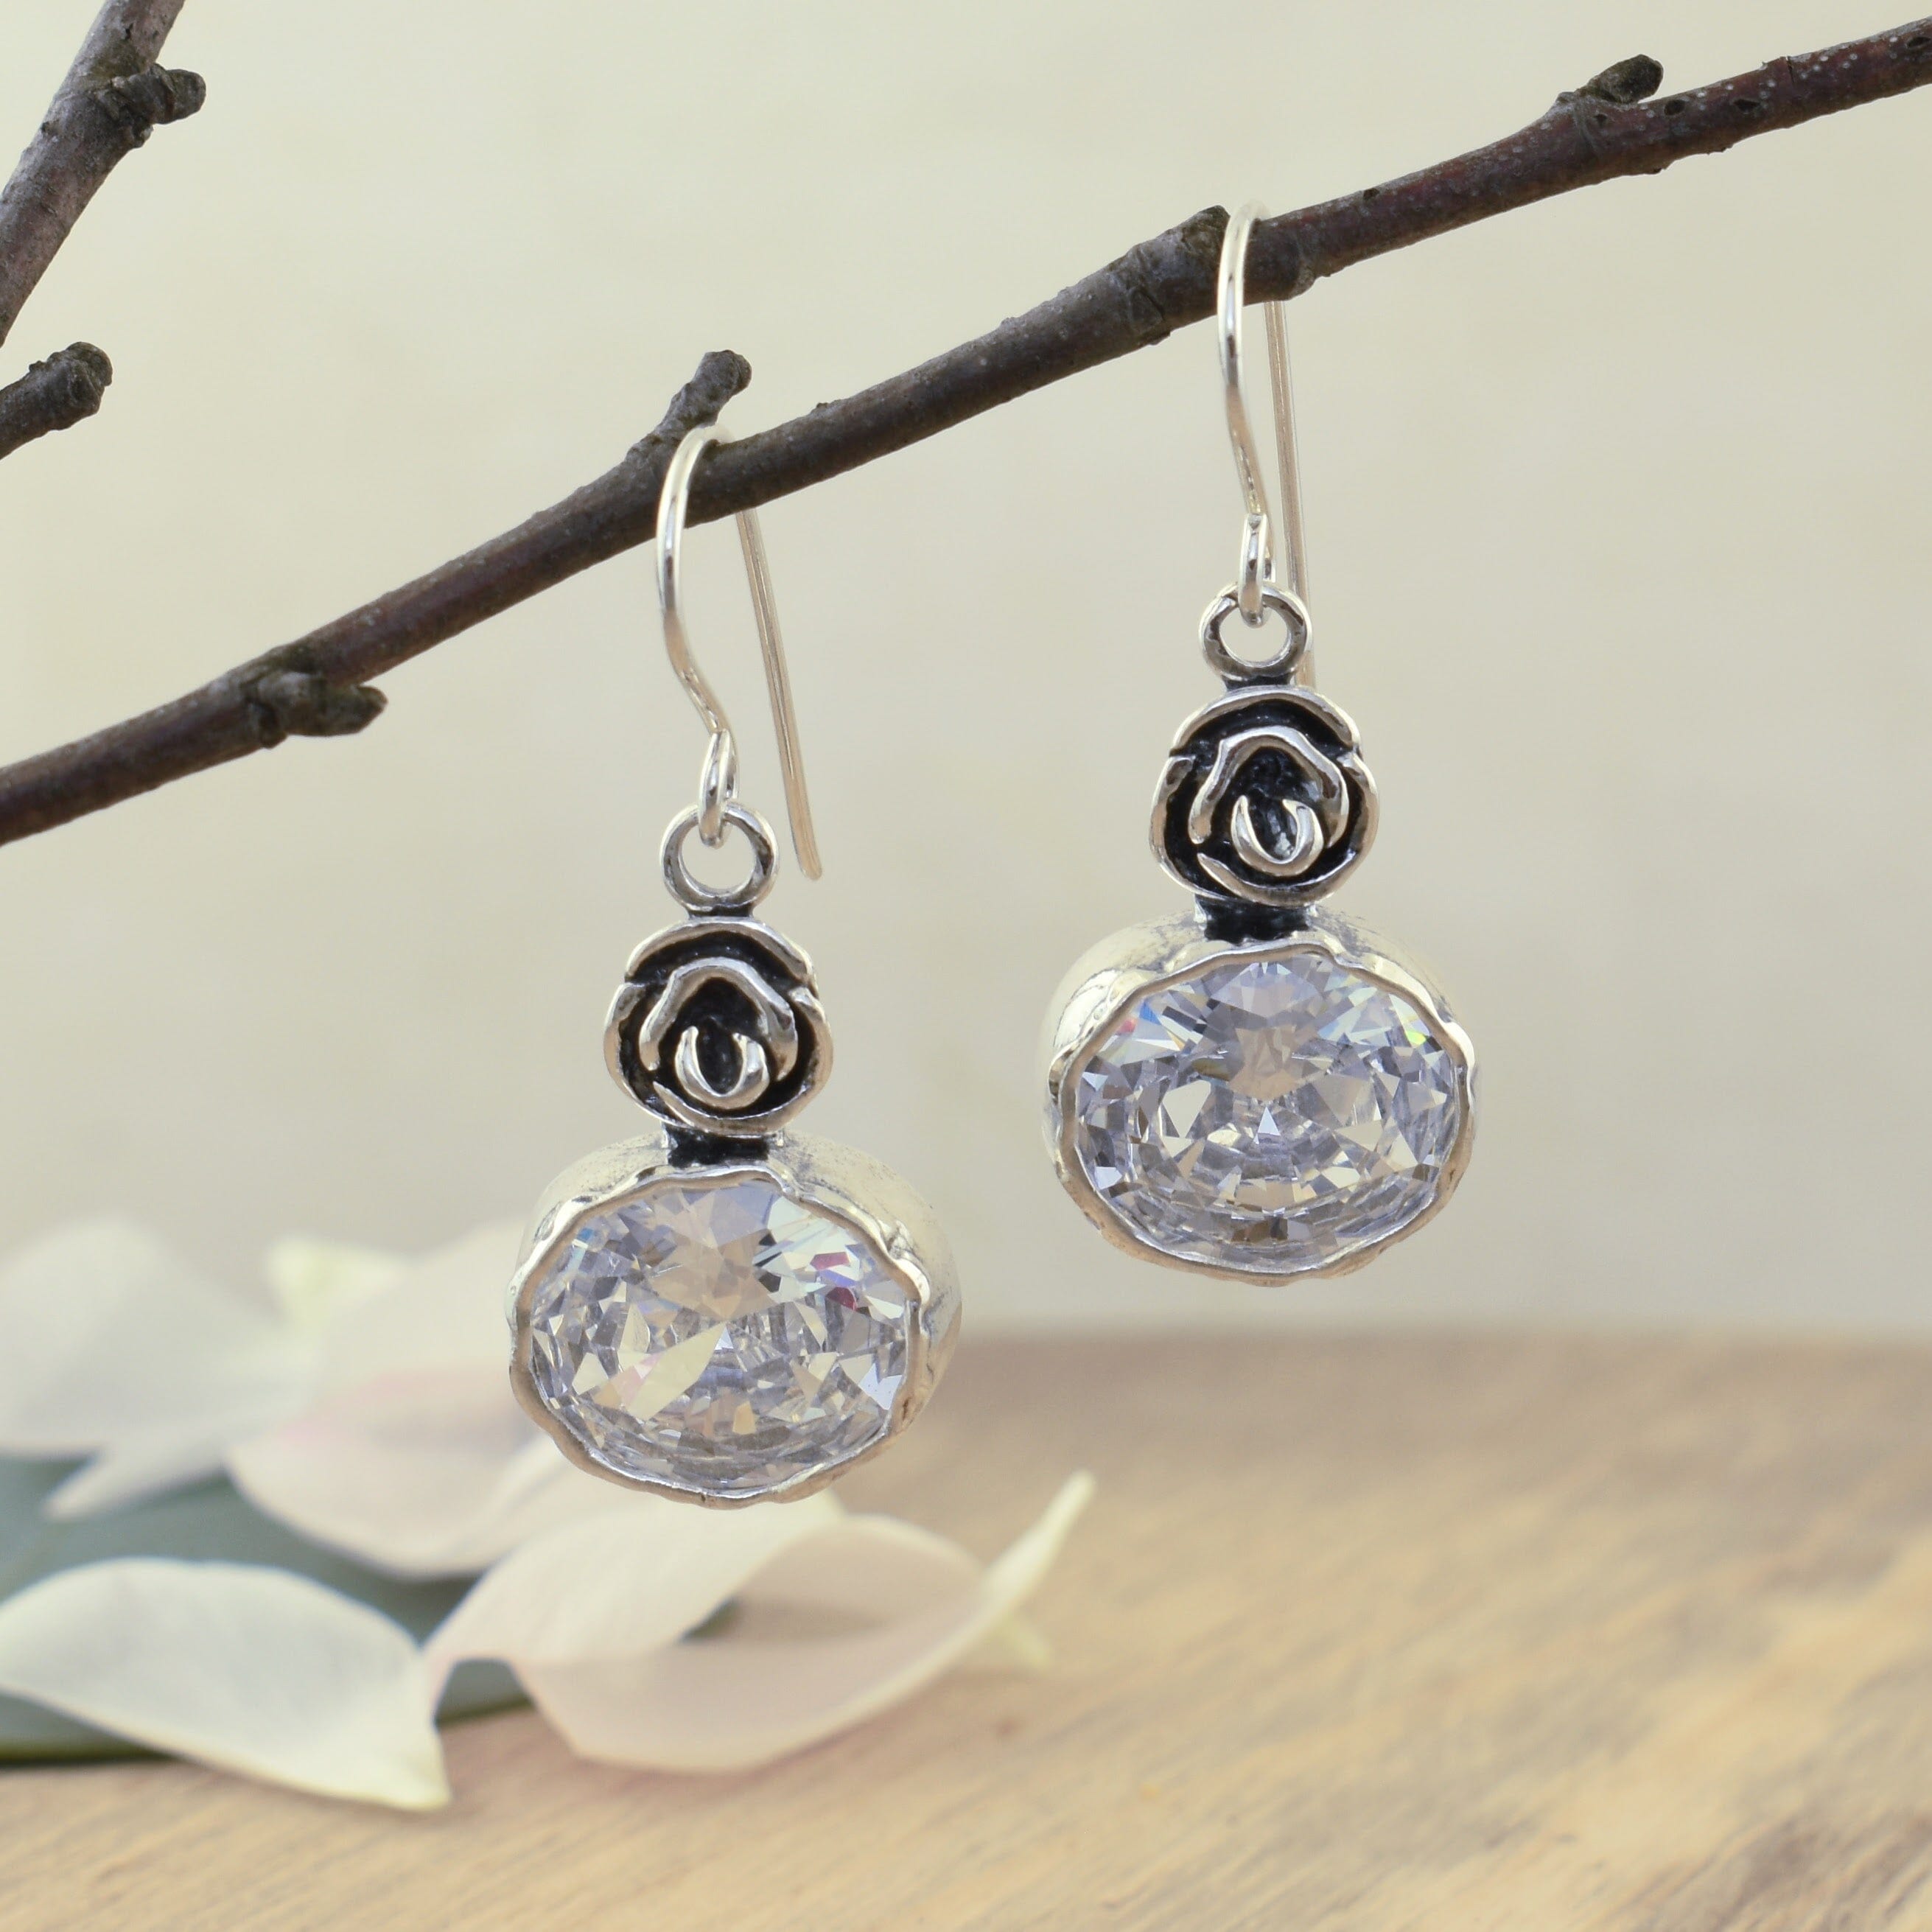 chunky dangling earrings featuring a rose and oval cz